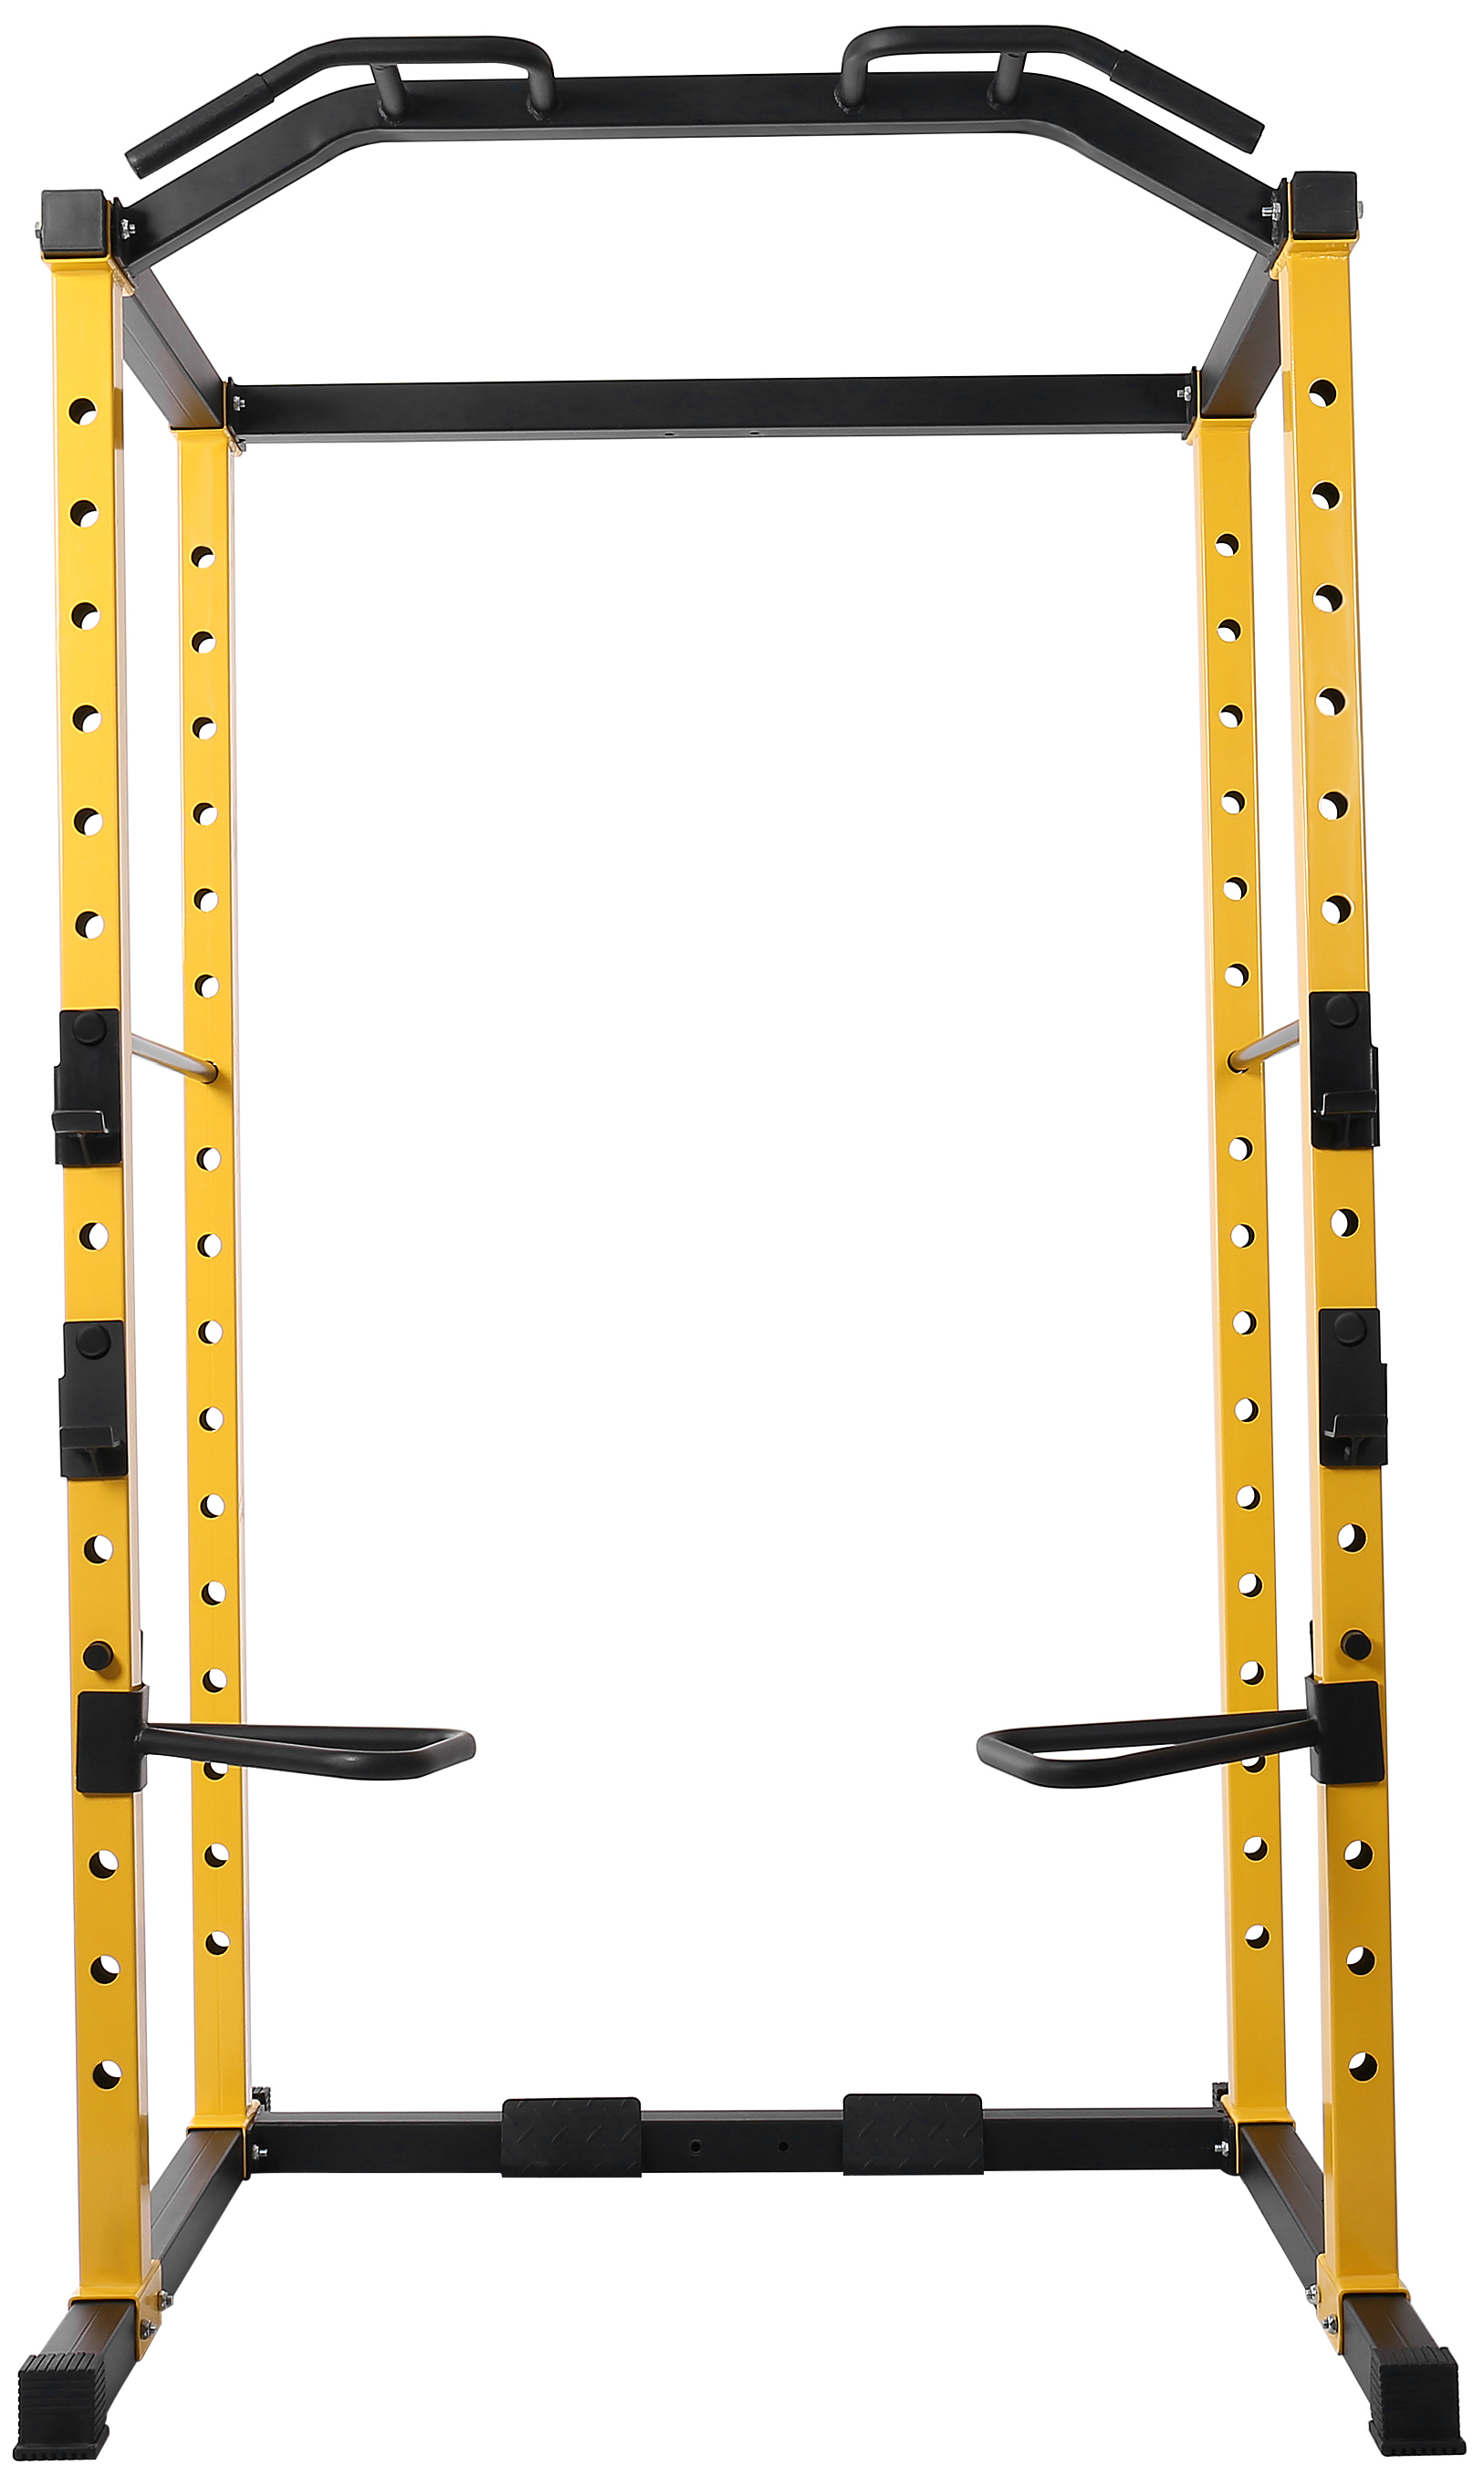 HulkFit Multi-Function Adjustable Power Cage with J-Hooks, Safety Bars or Safety Straps, Power Cage Only, Yellow - image 2 of 5